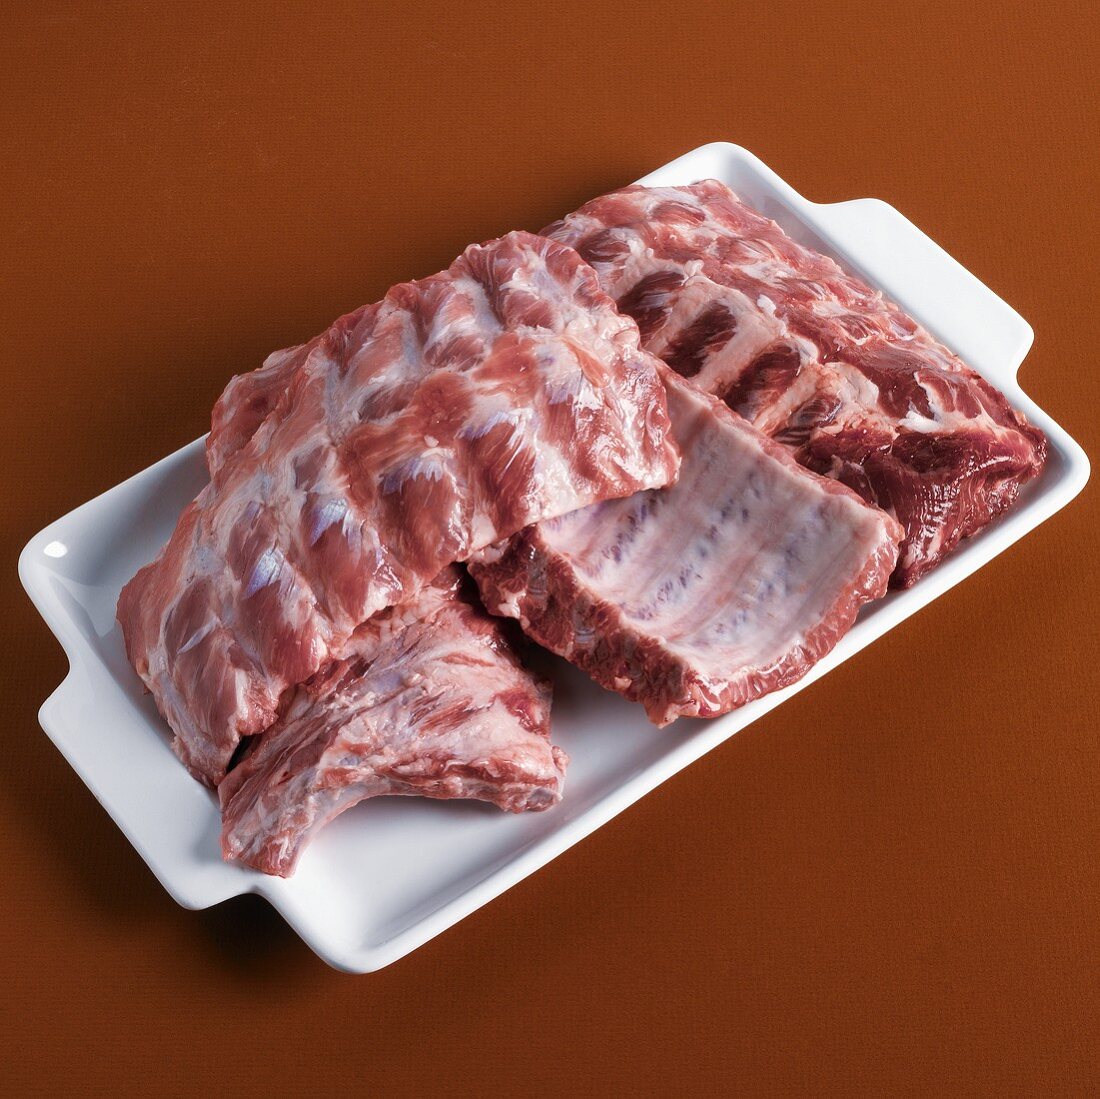 Raw Baby Back Pork Ribs on a White Platter